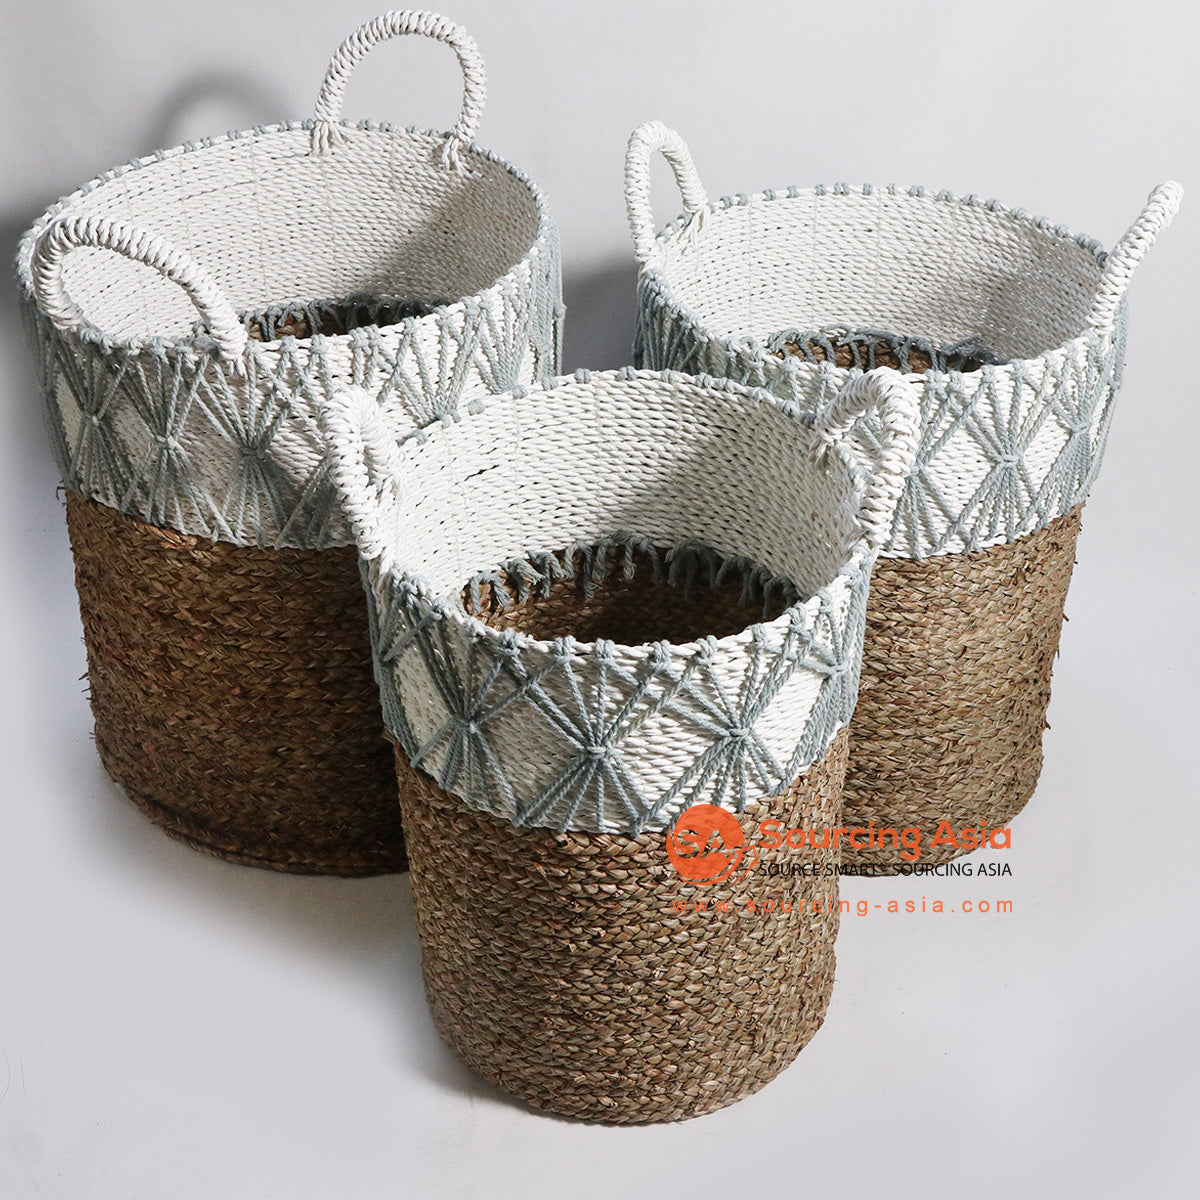 HBSC139 SET OF THREE NATURAL AND WHITE SEAGRASS BASKETS WITH MACRAME